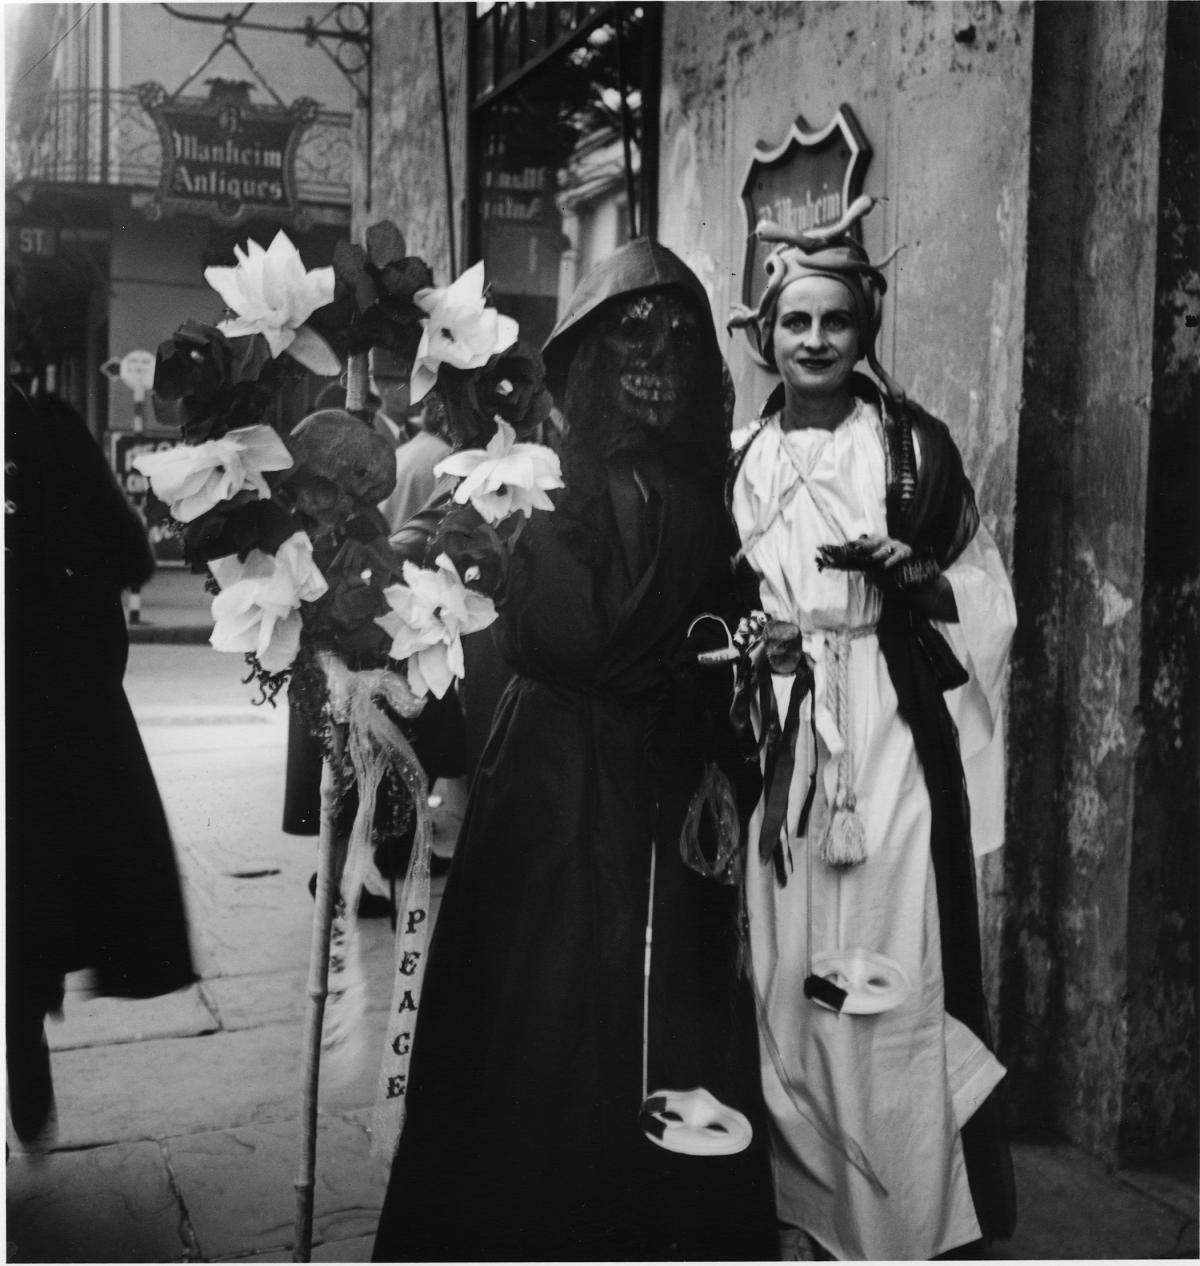 Two revelers stand on a New Orleans street; one wearing a long white robe and snake-topped cap, the other in a hooded black robe, black skull mask, and holding a wreath of black and white flowers